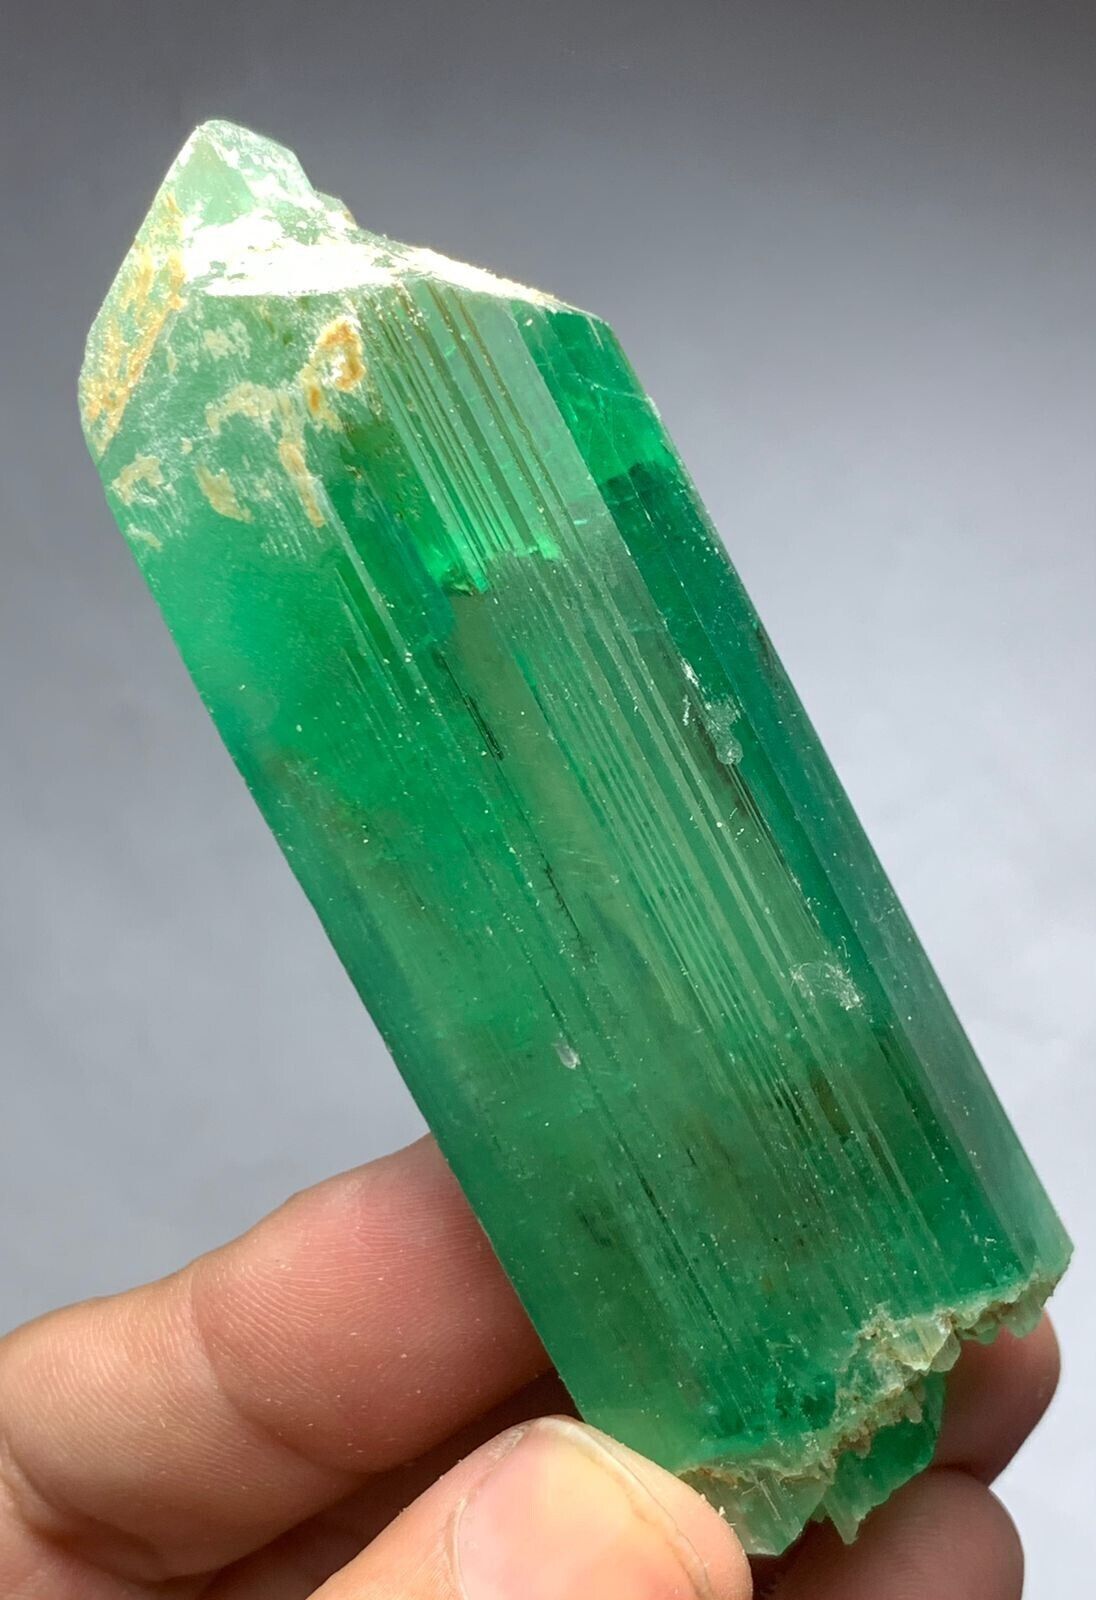 558 Cts Beautiful Terminated Hiddenite Kunzite Crystal from Afghanistan